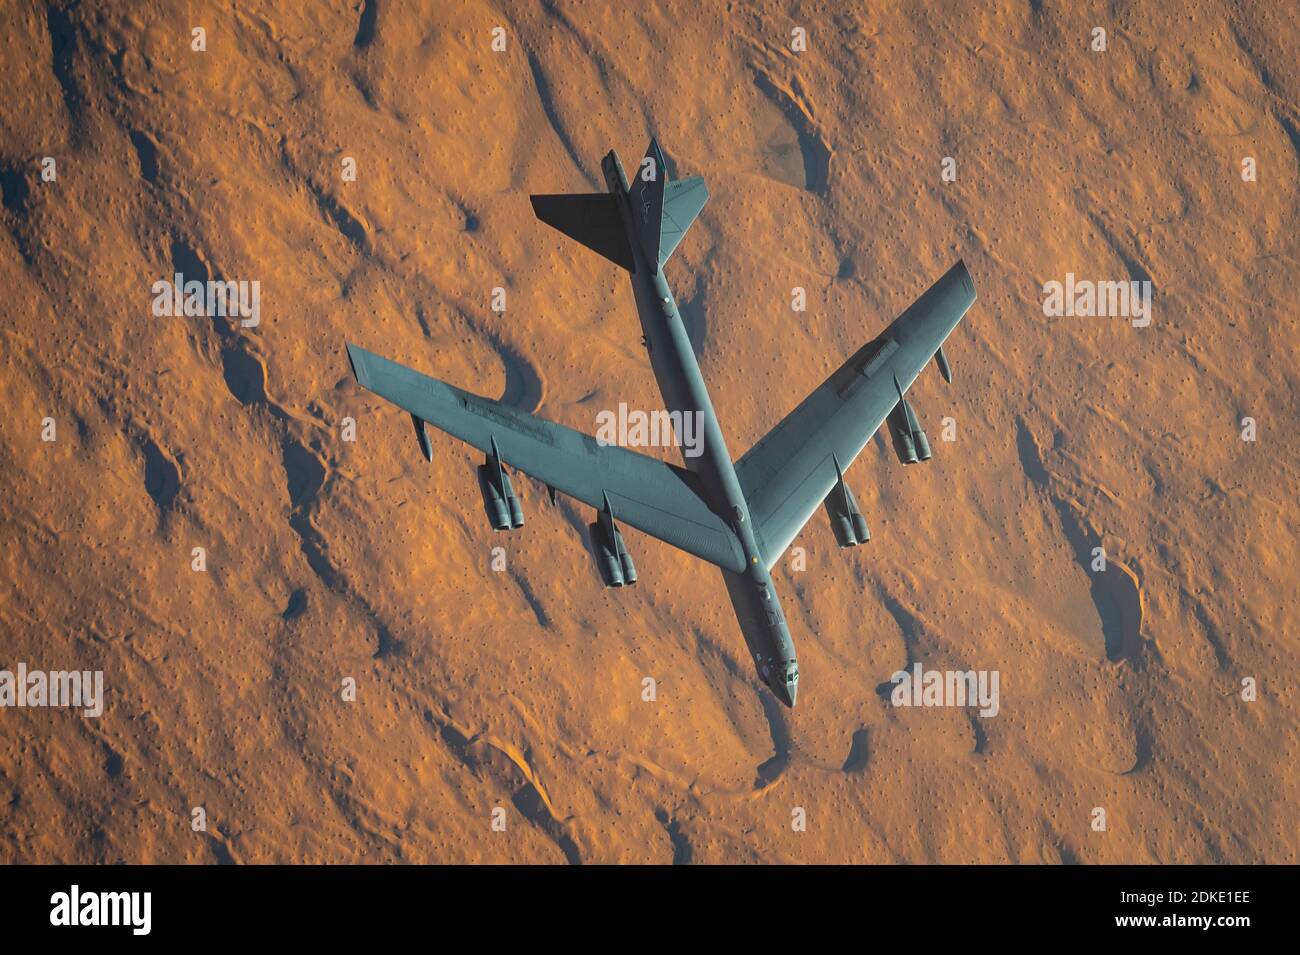 A U.S. Air Force B-52 Stratofortress strategic bomber aircraft from the 2nd Bomb Wing, departs after being refueled inflight from a KC-135 Stratotanker aircraft during a multi-day Bomber Task Force mission December 10, 2020 over Qatar. The bomber was relocated to the region following an increase in tensions with Iran. Stock Photo